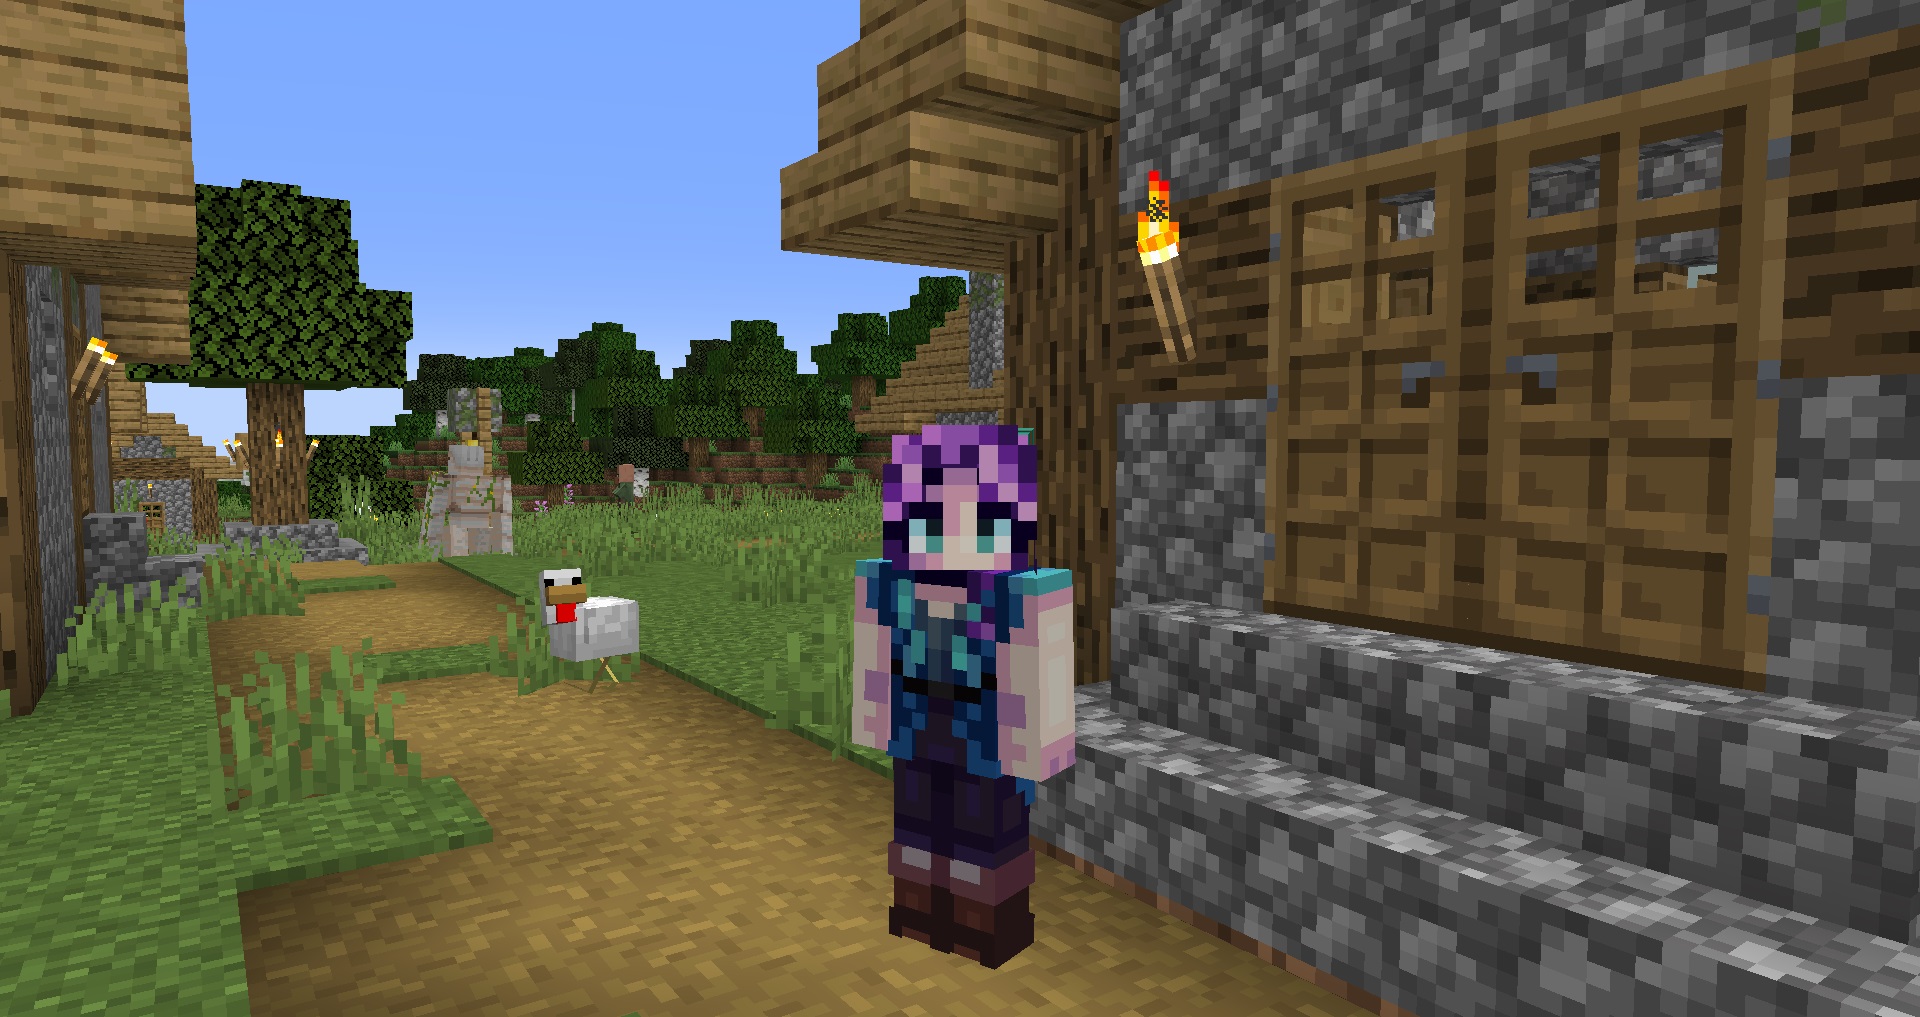 Minecraft skin - Abigail from Stardew Valley stands in front of a village house